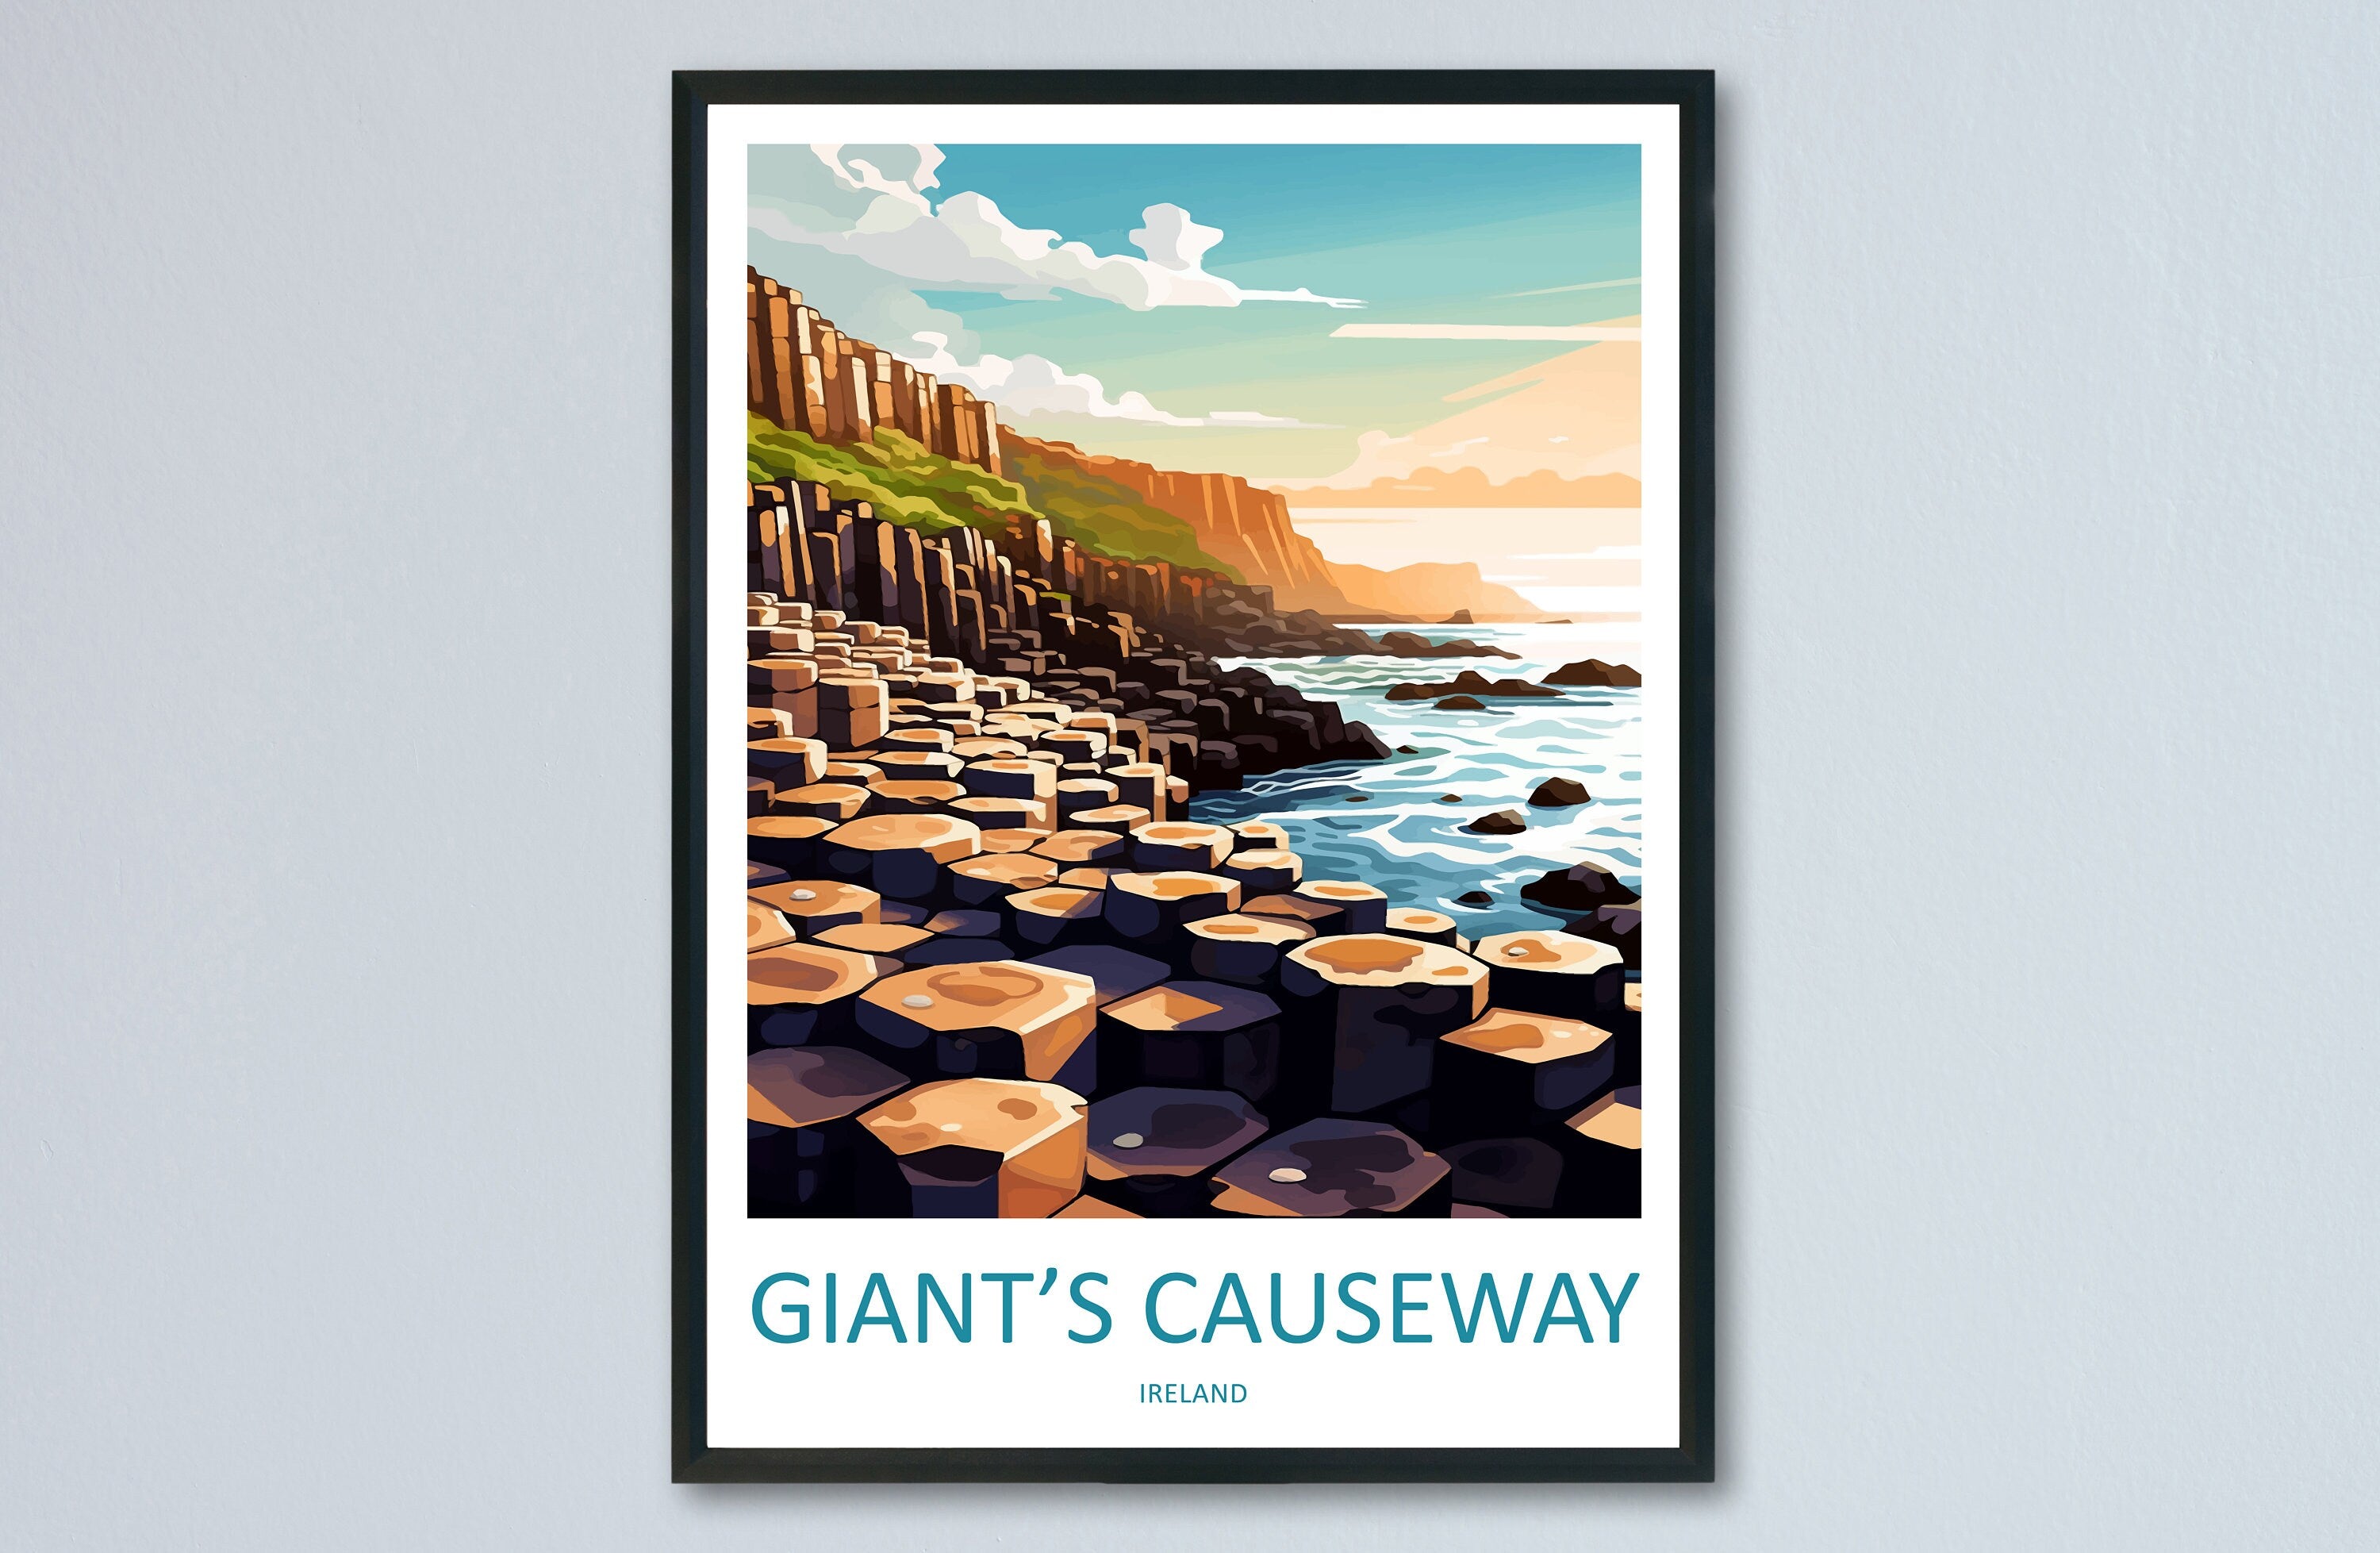 Giant's Causeway Print Giant's Causeway Home Décor Landscape Print Giant's Causeway Wall Art Northern Ireland Enthusiast Gift Wall Hanging